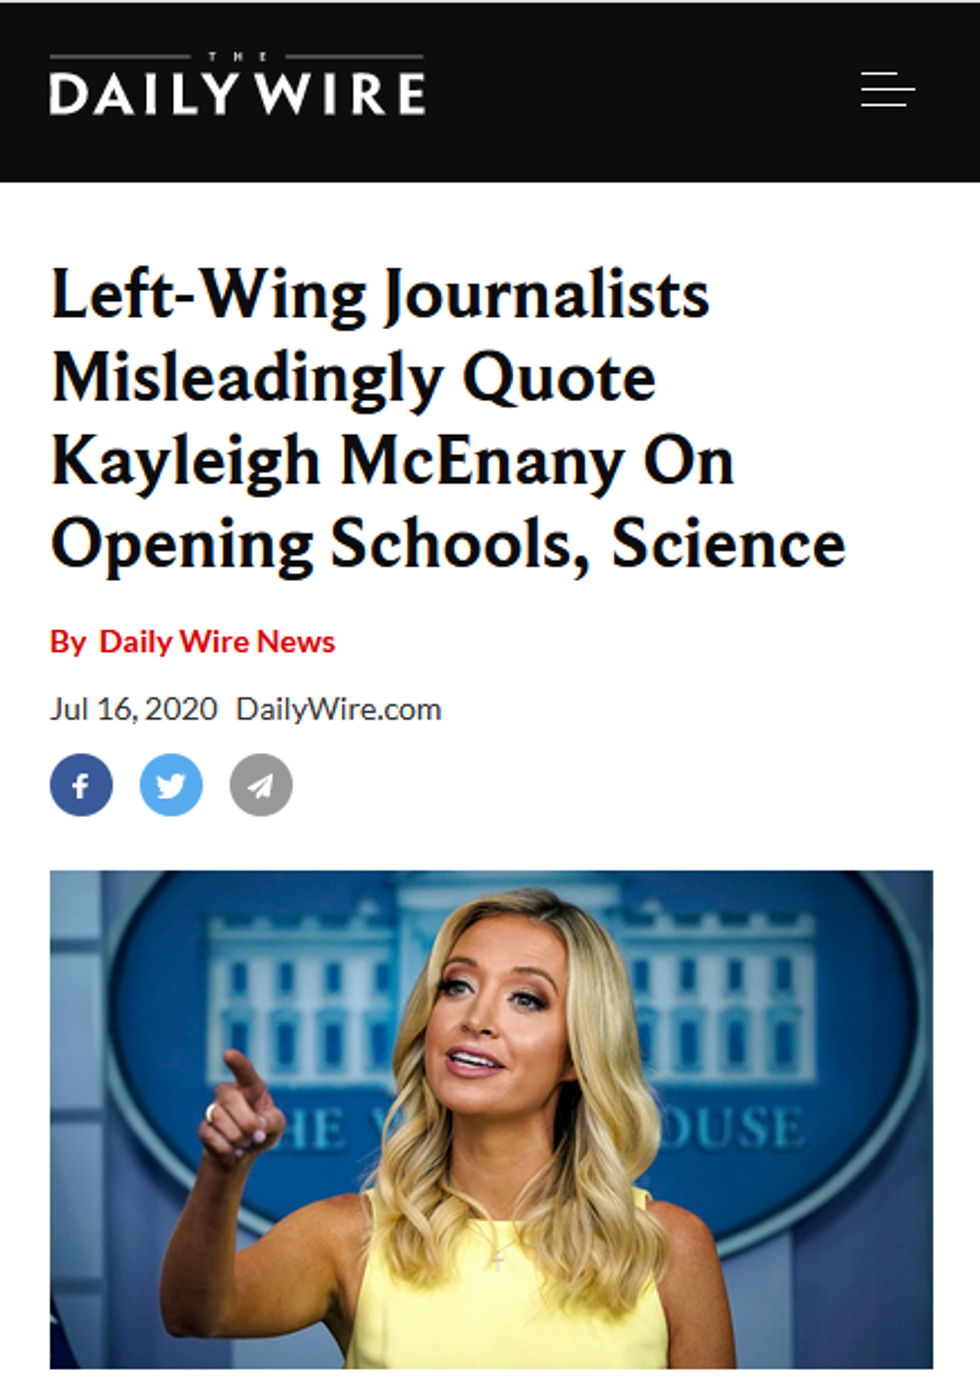 Daily Wire: Left-Wing Journalists Misleadingly Quote Kayleigh McEnany On Opening Schools, Science